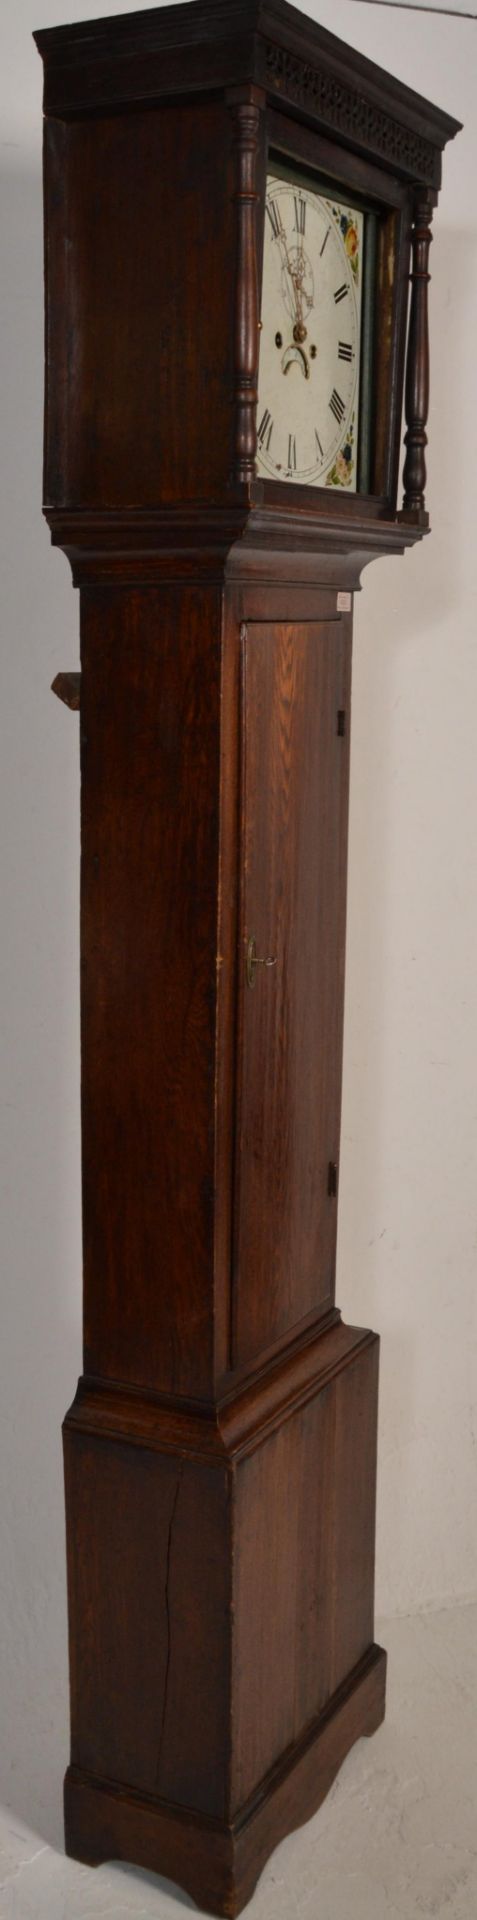 A 19th Century oak cased grandfather / longcase clock having a painted face with floral decoration - Bild 3 aus 5